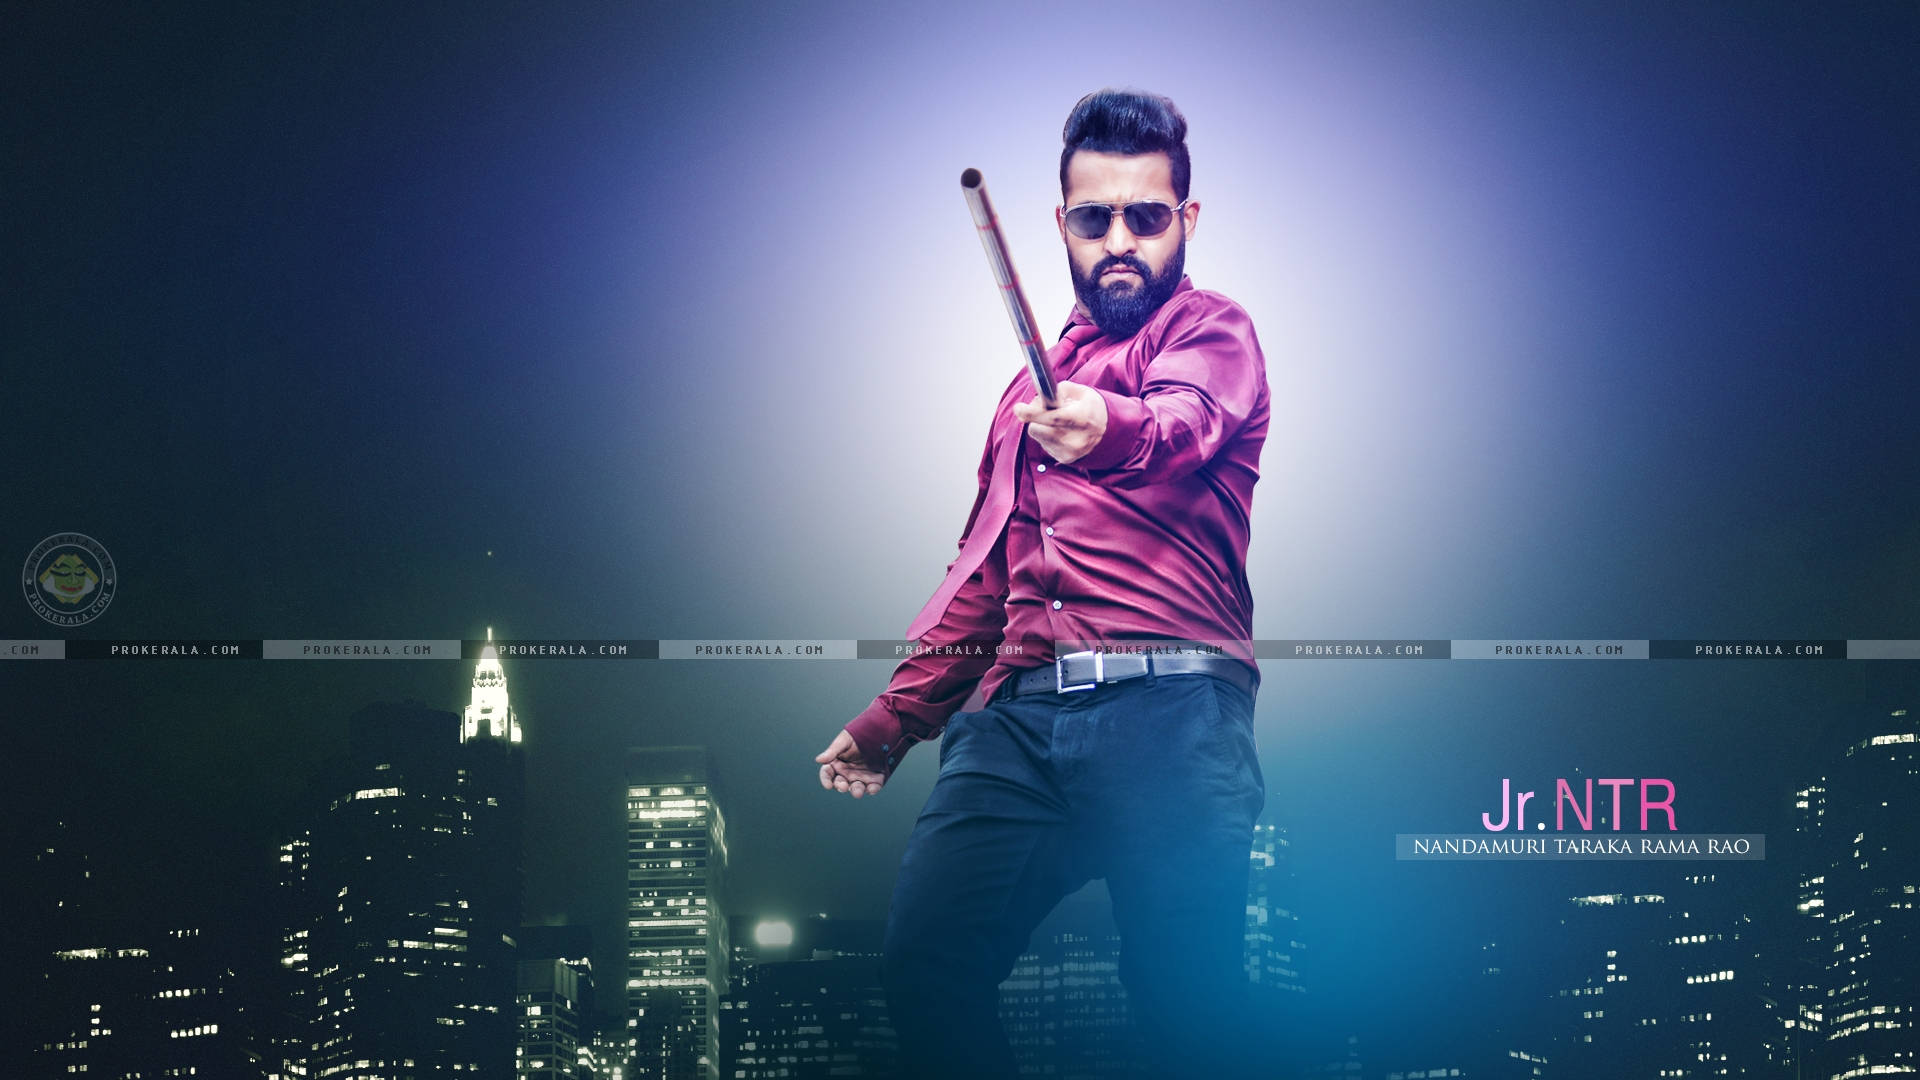 Energetic Star Jr Ntr Lighting Up The City Nights Background